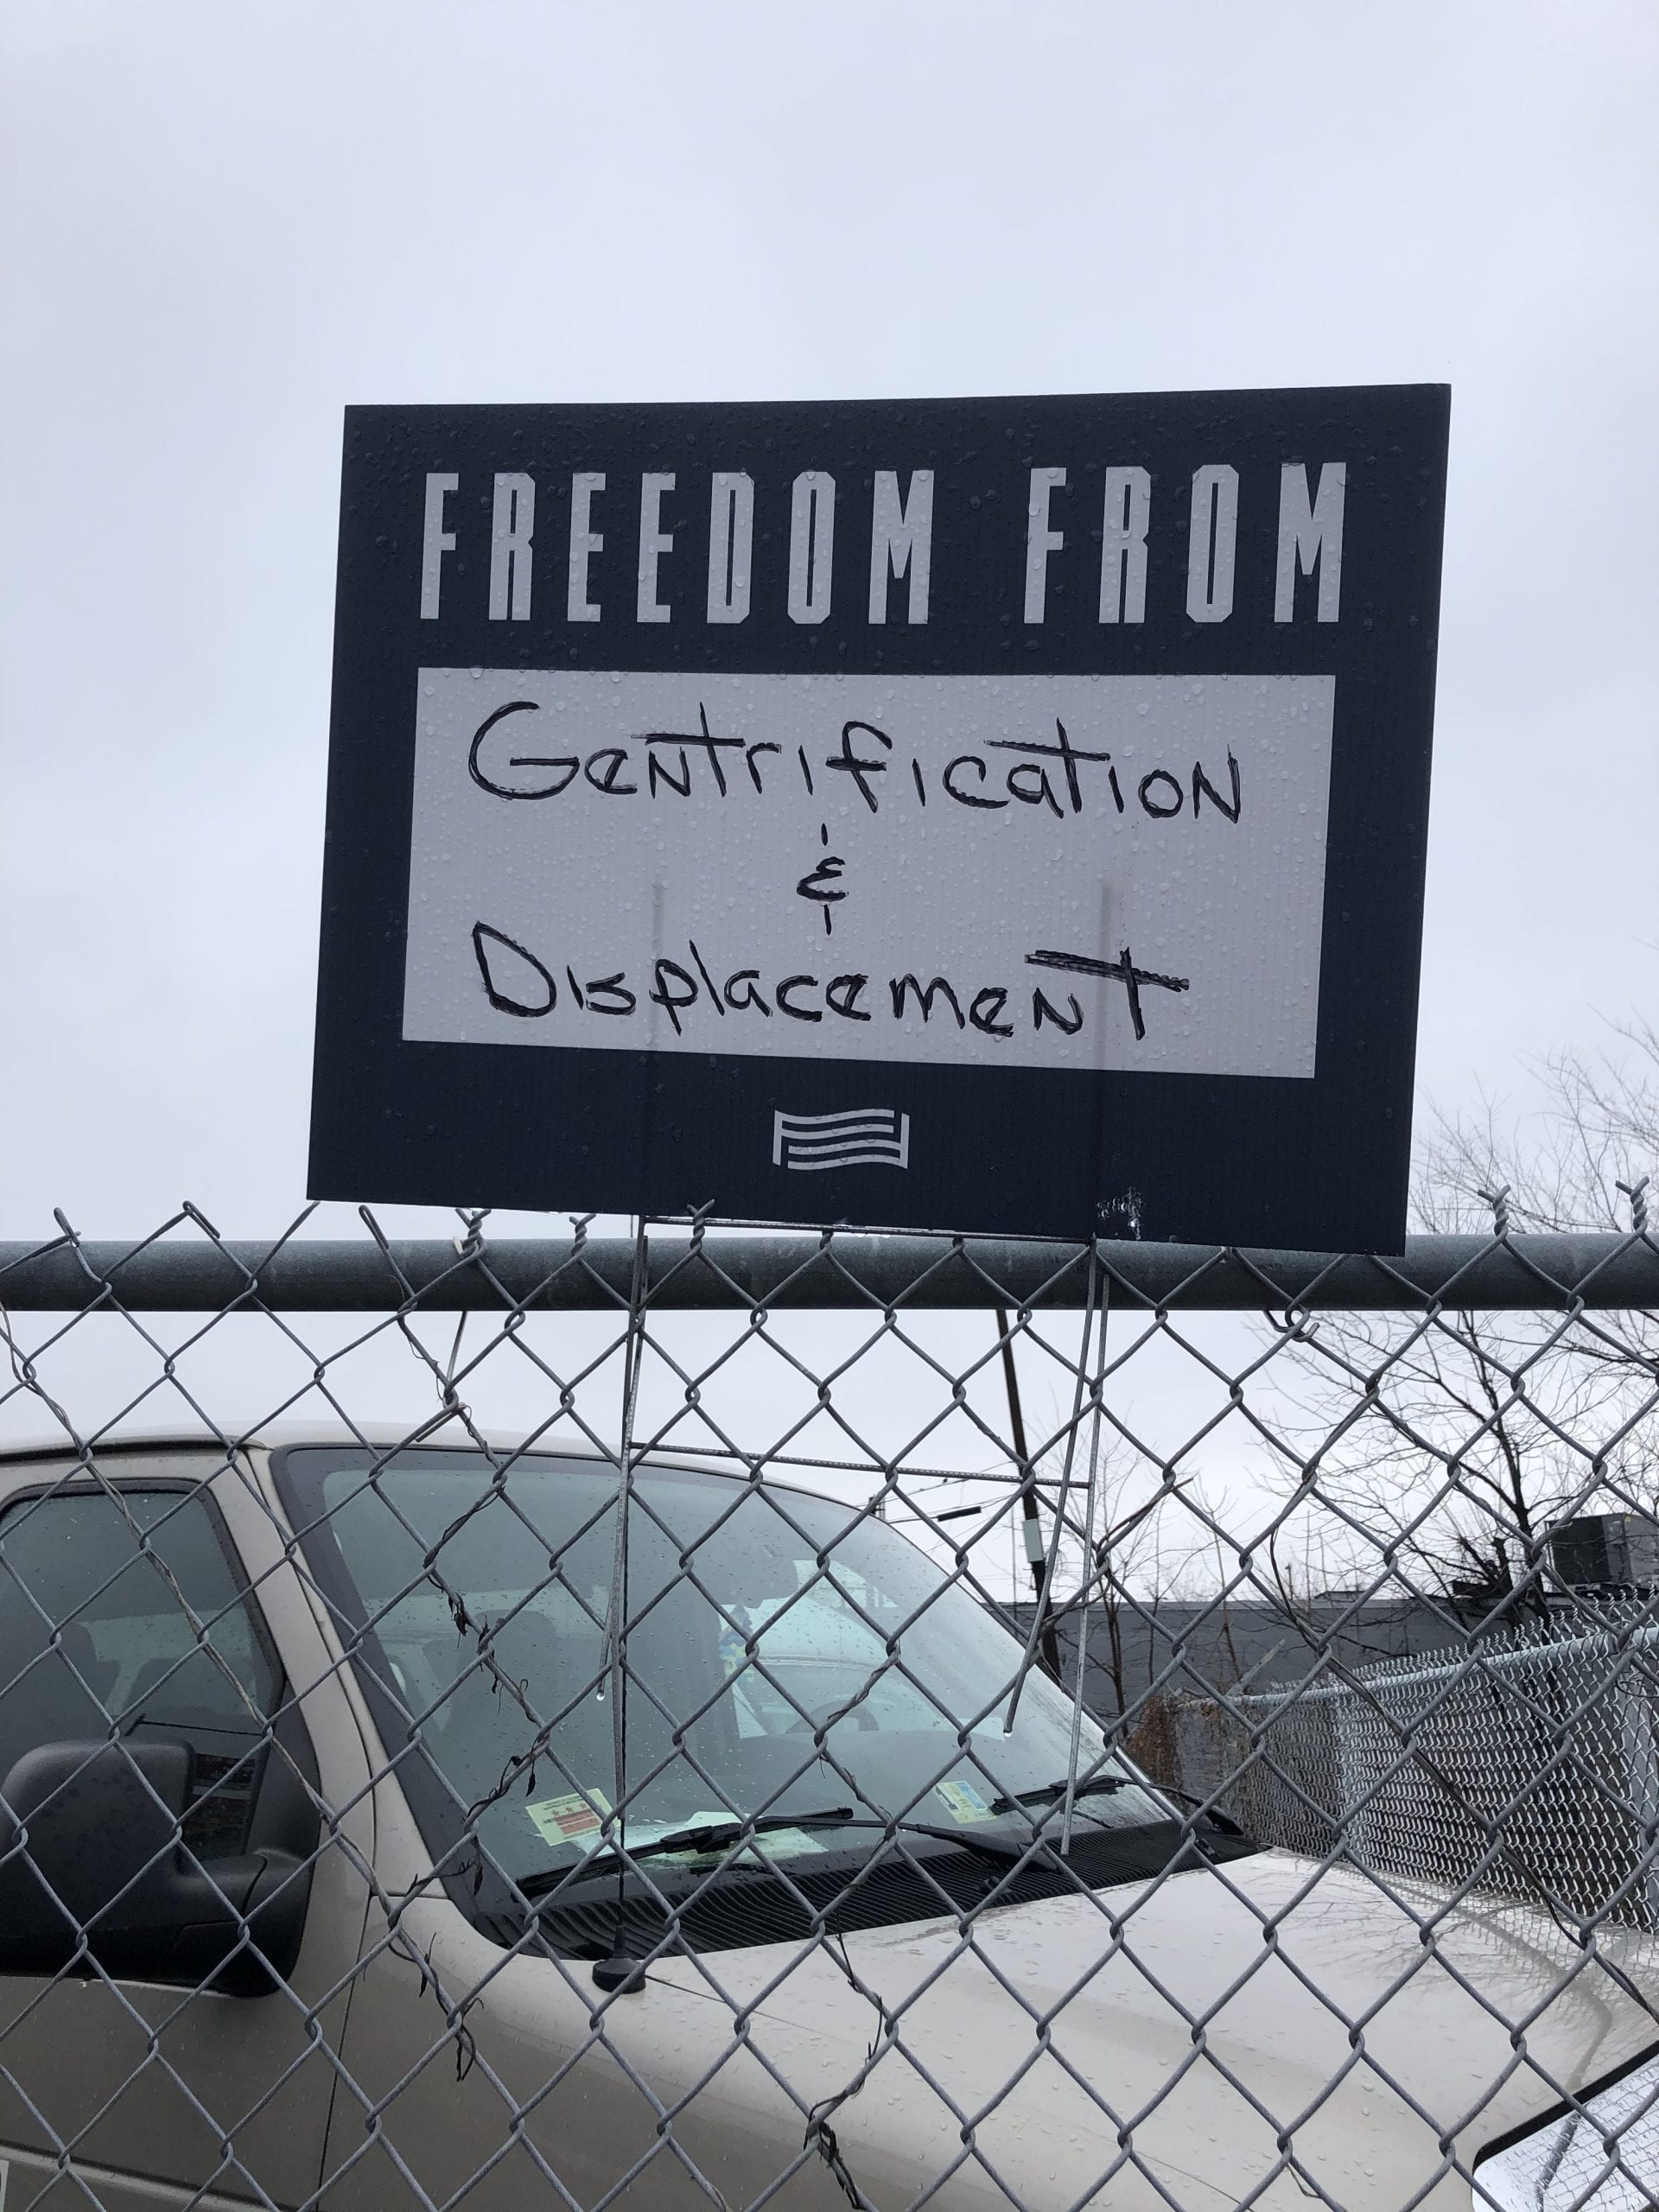 A sign reading "Freedom From: Gentrification and Displacement" on top of a car in front of a chain link fence